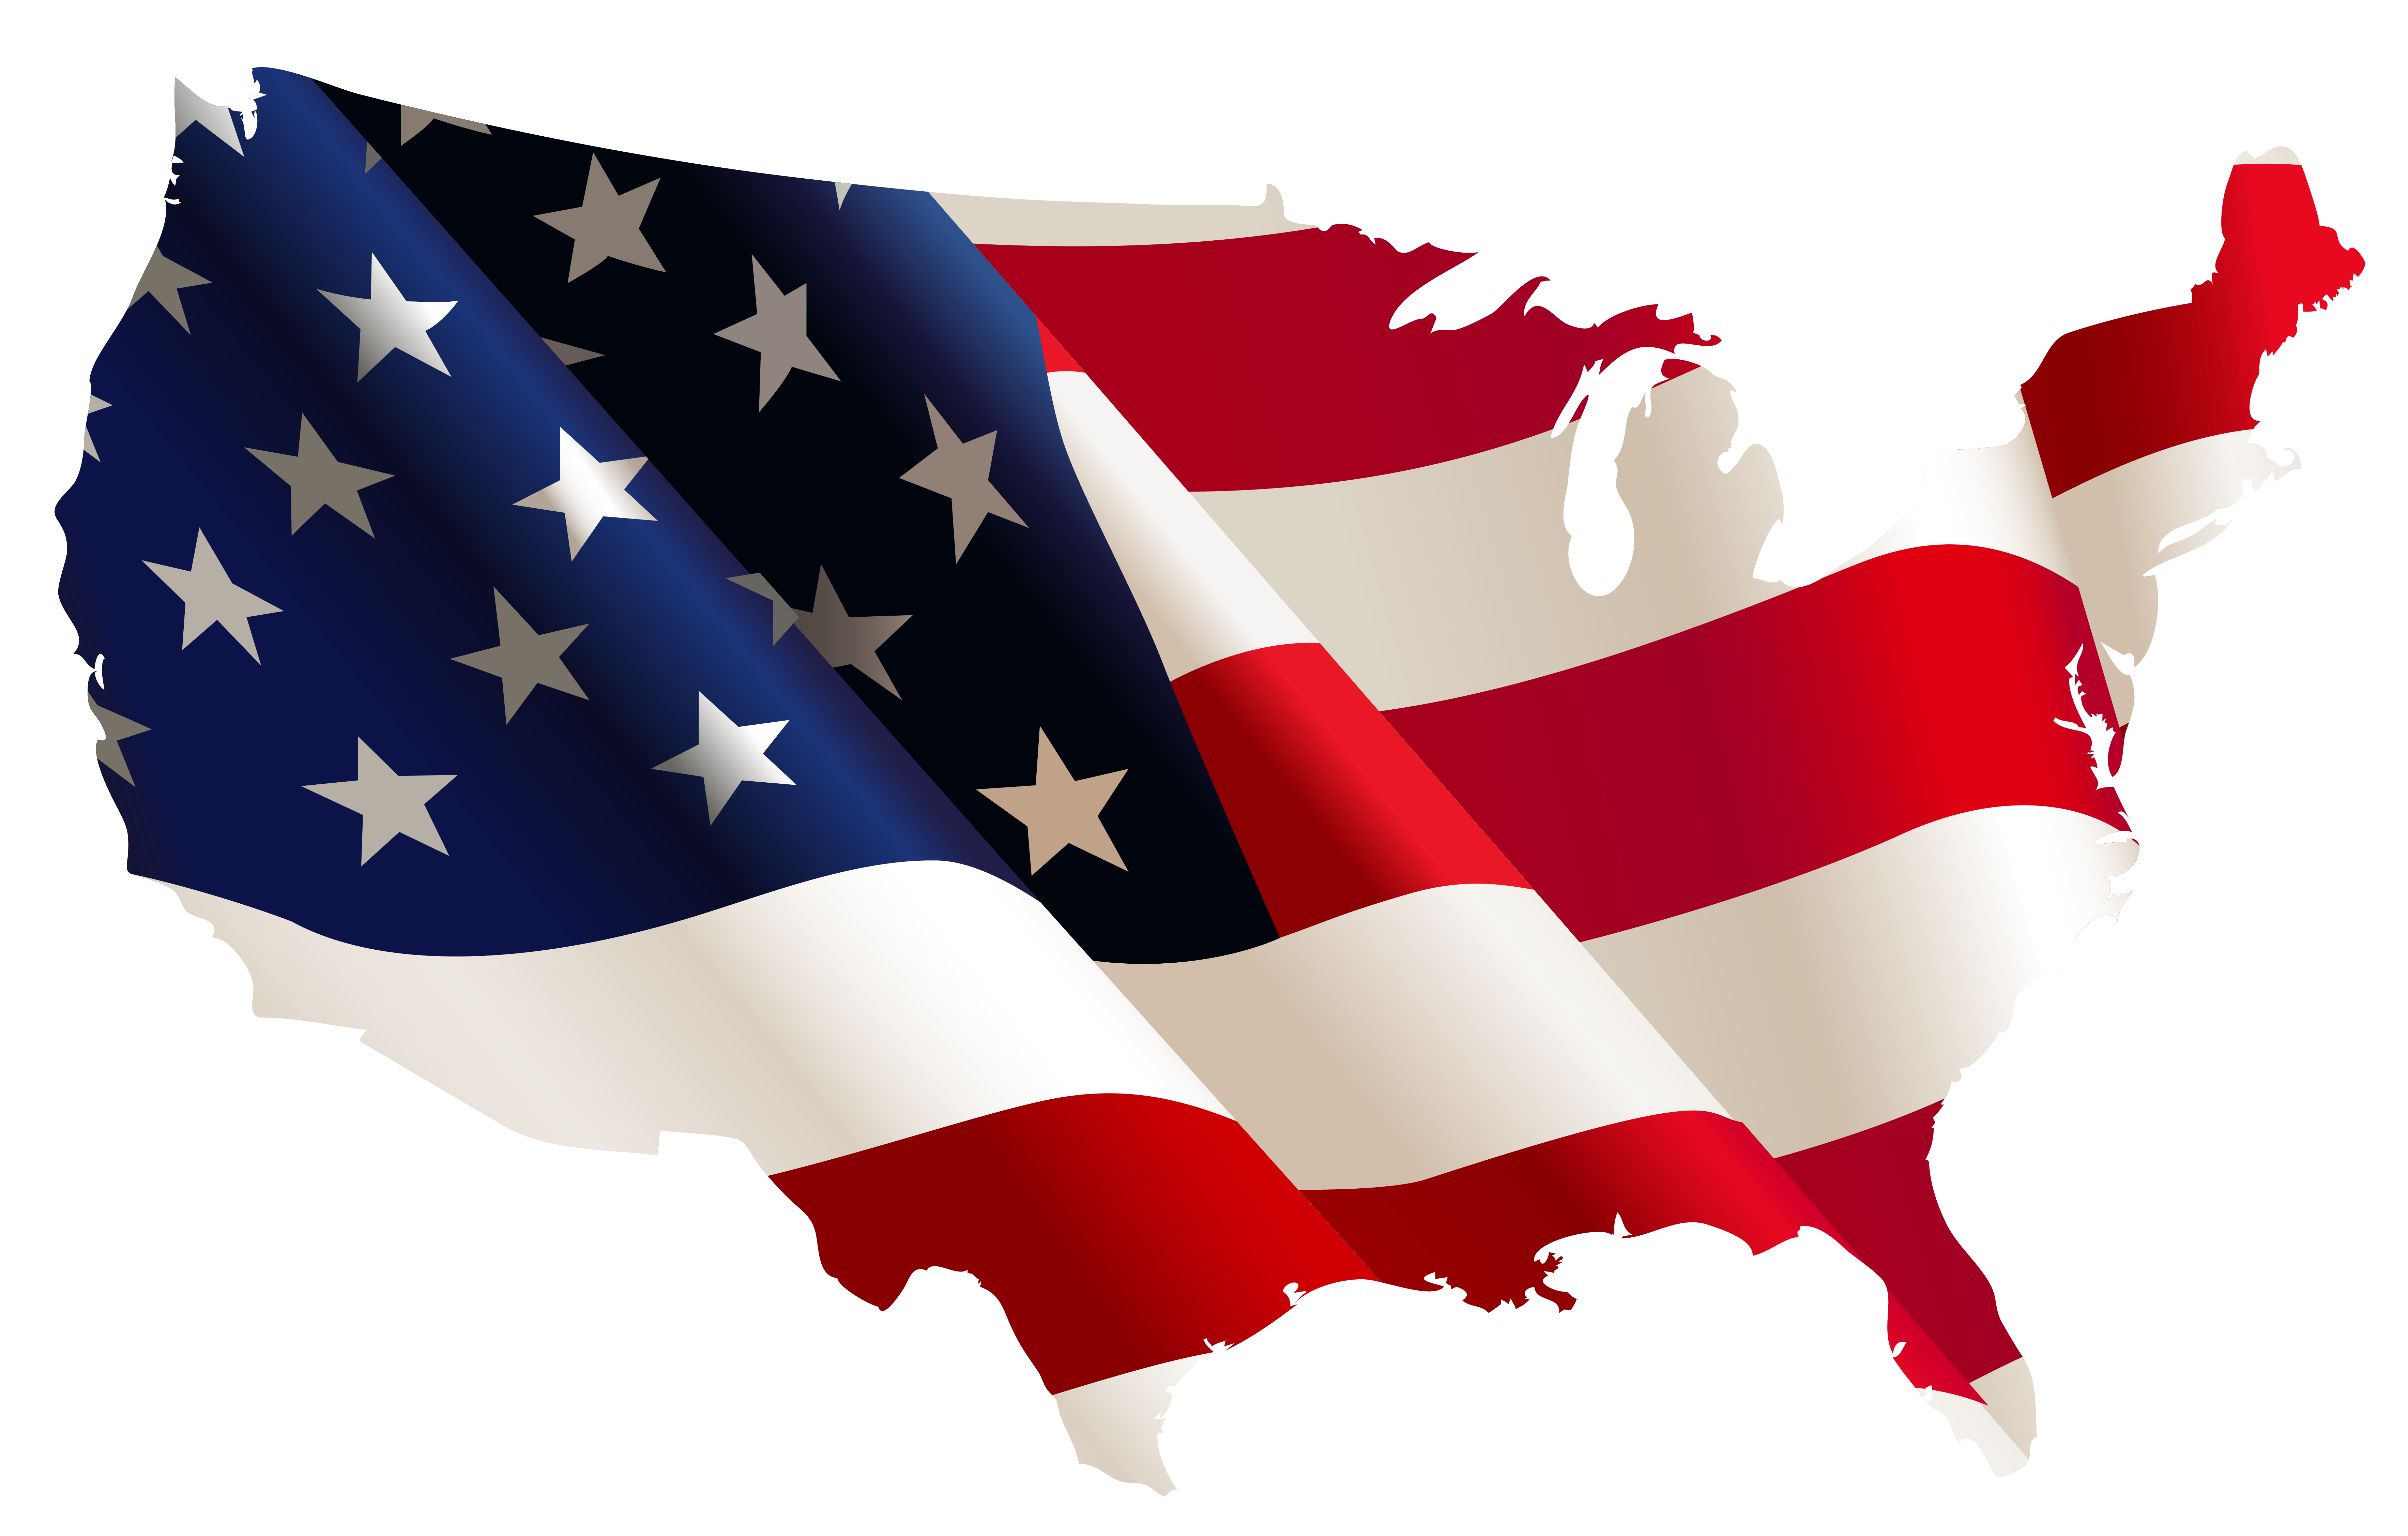 usa clipart freedom american